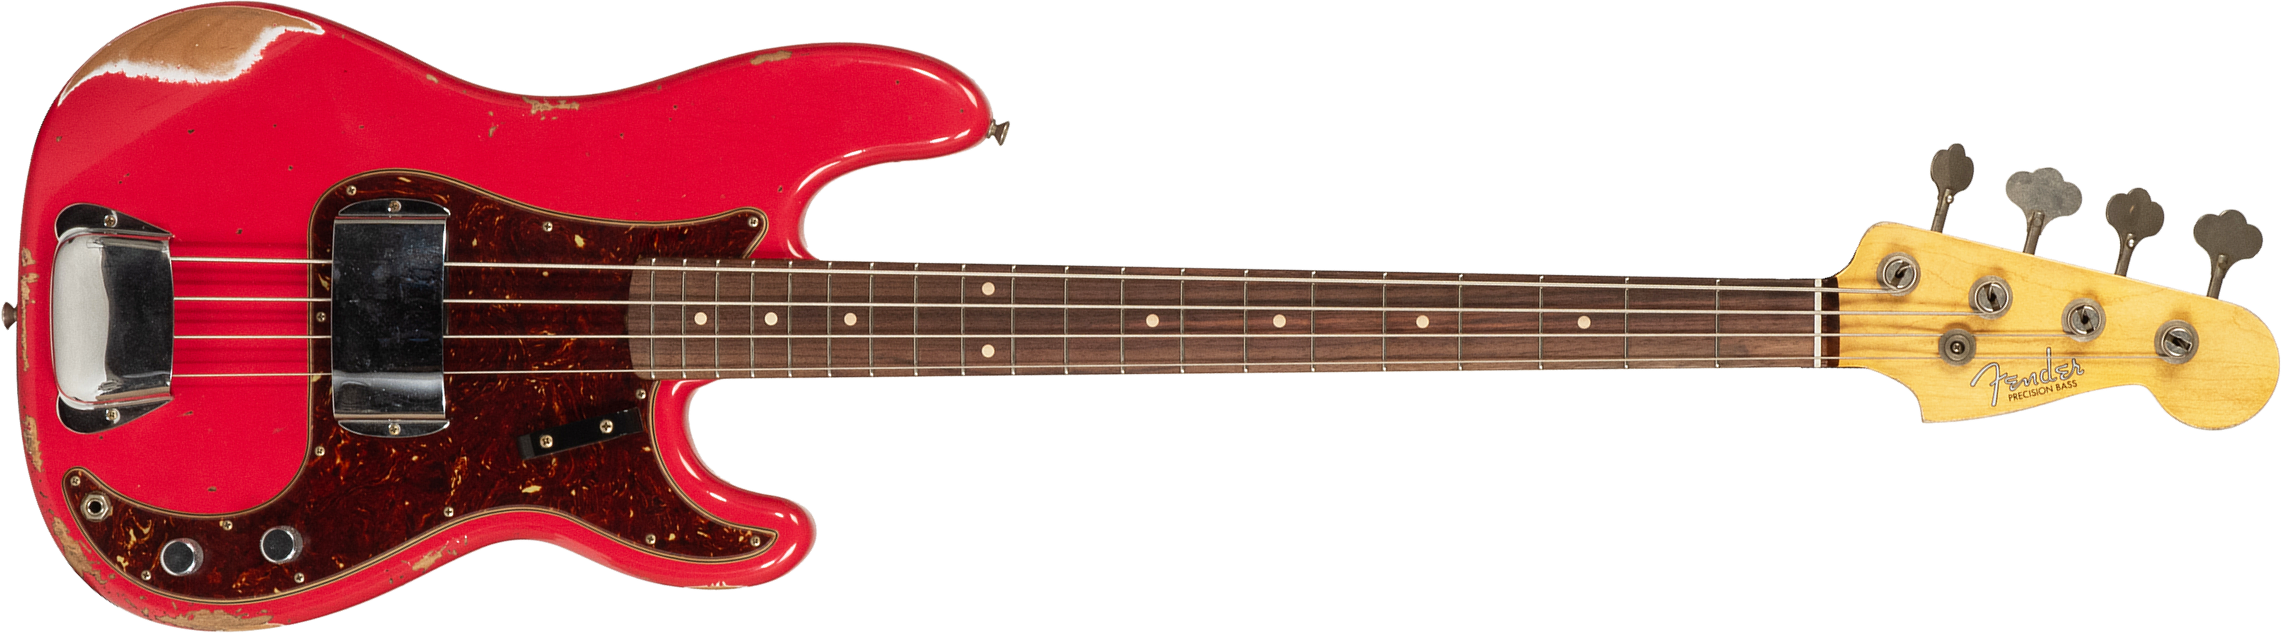 Fender Custom Shop Precision Bass 1960 Rw #r117926 - Heavy Relic Fiesta Red - Solid body electric bass - Main picture